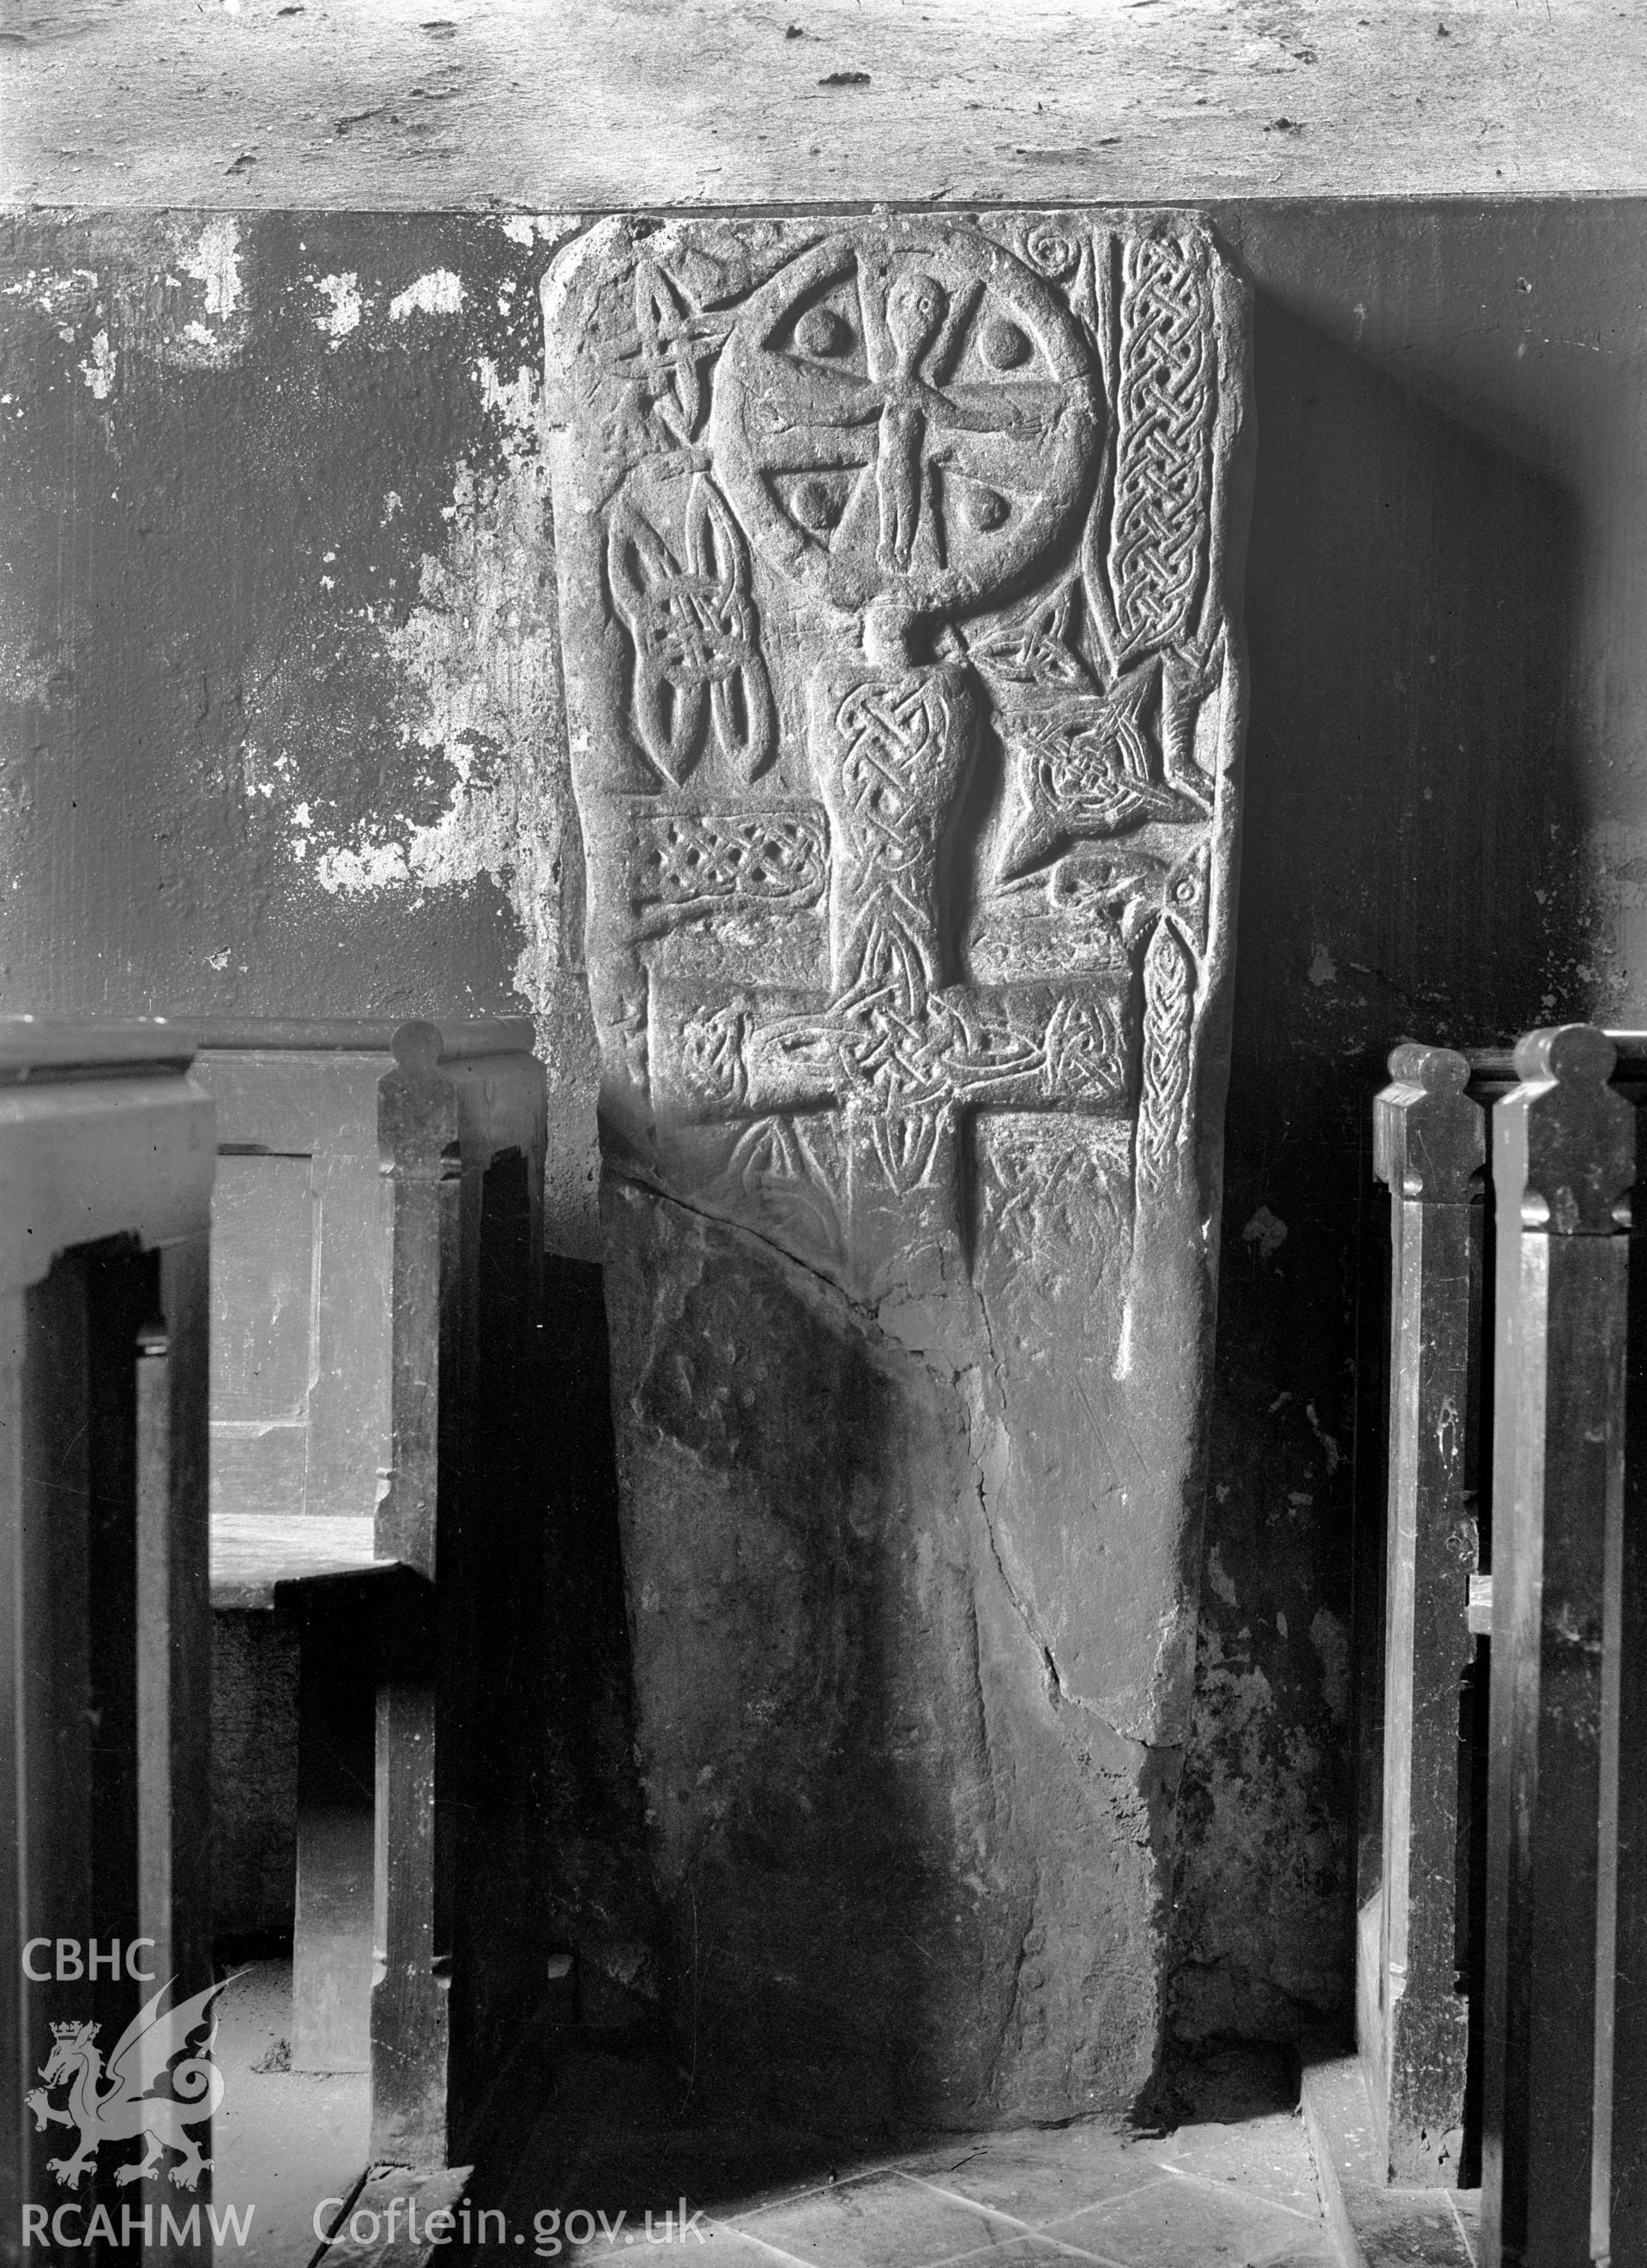 Digital copy of a black and white negative showing Inscribed Stone, Meifod Church.